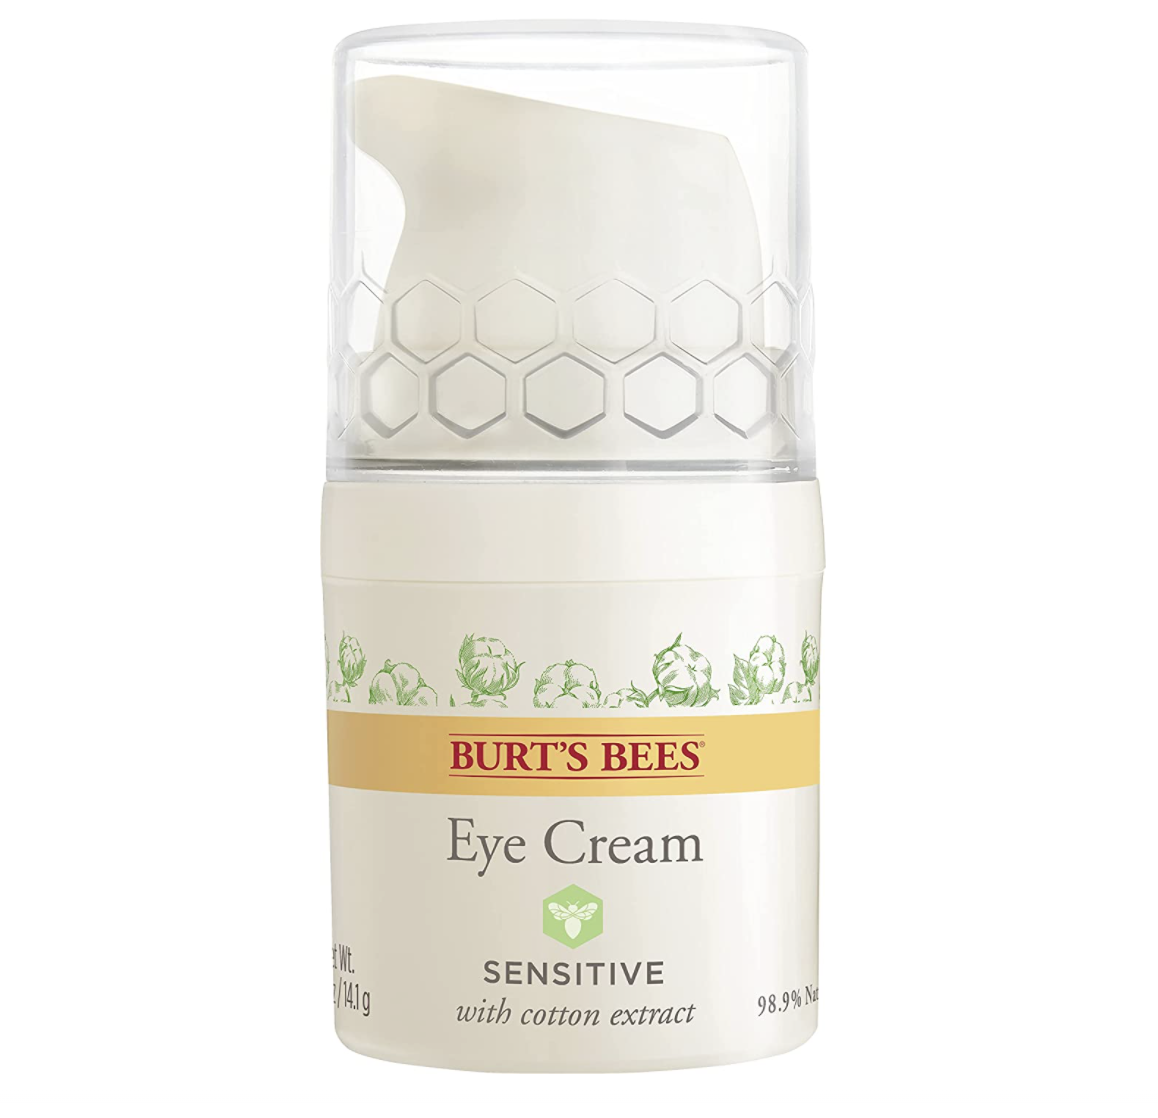 Green, white, and yellow bottle of eye cream that says &quot;Burt&#x27;s Bees eye cream sensitive with cotton extract&quot;